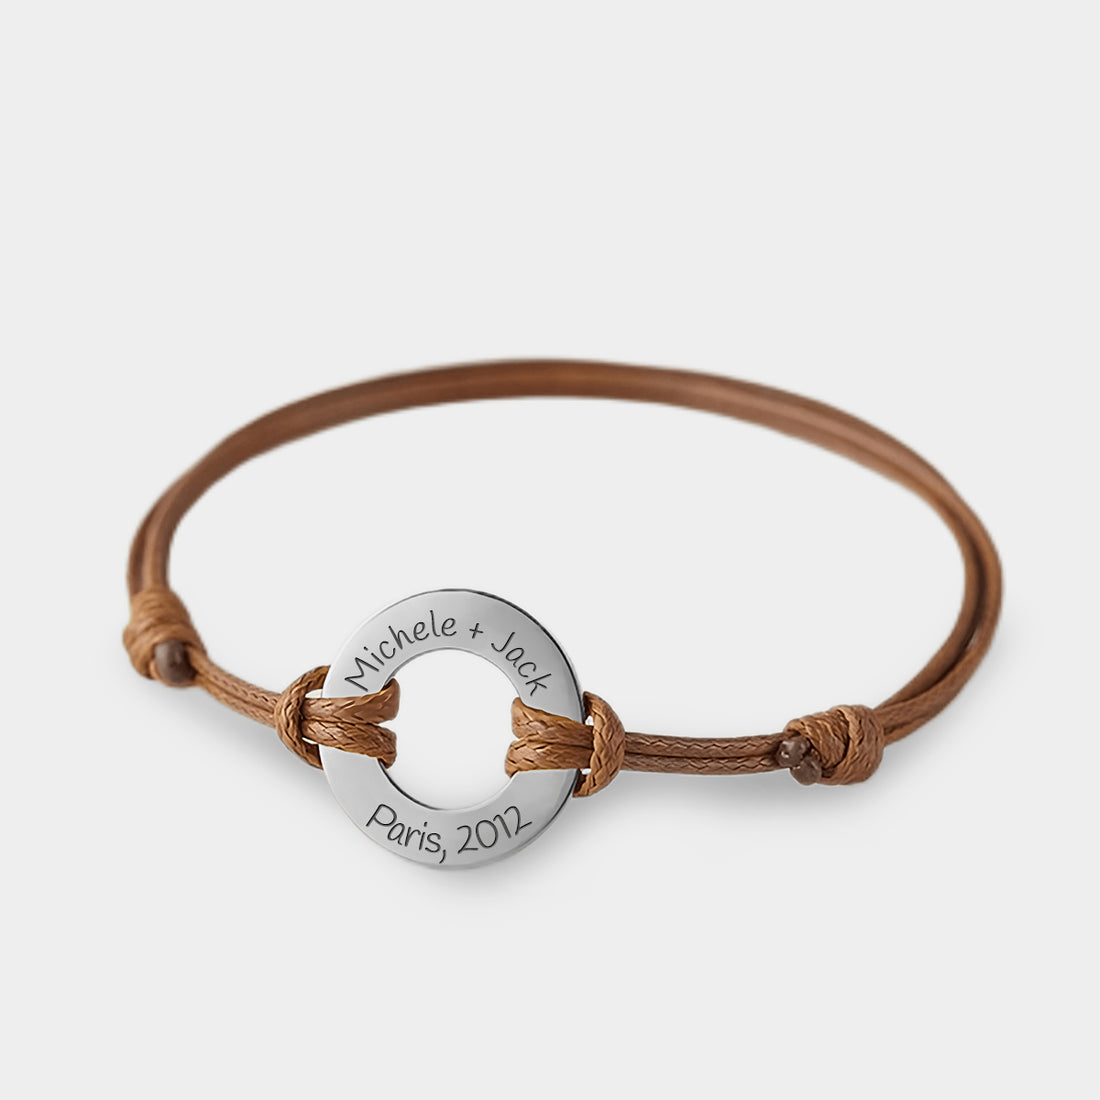 Personalized Leather Bracelet with Circle